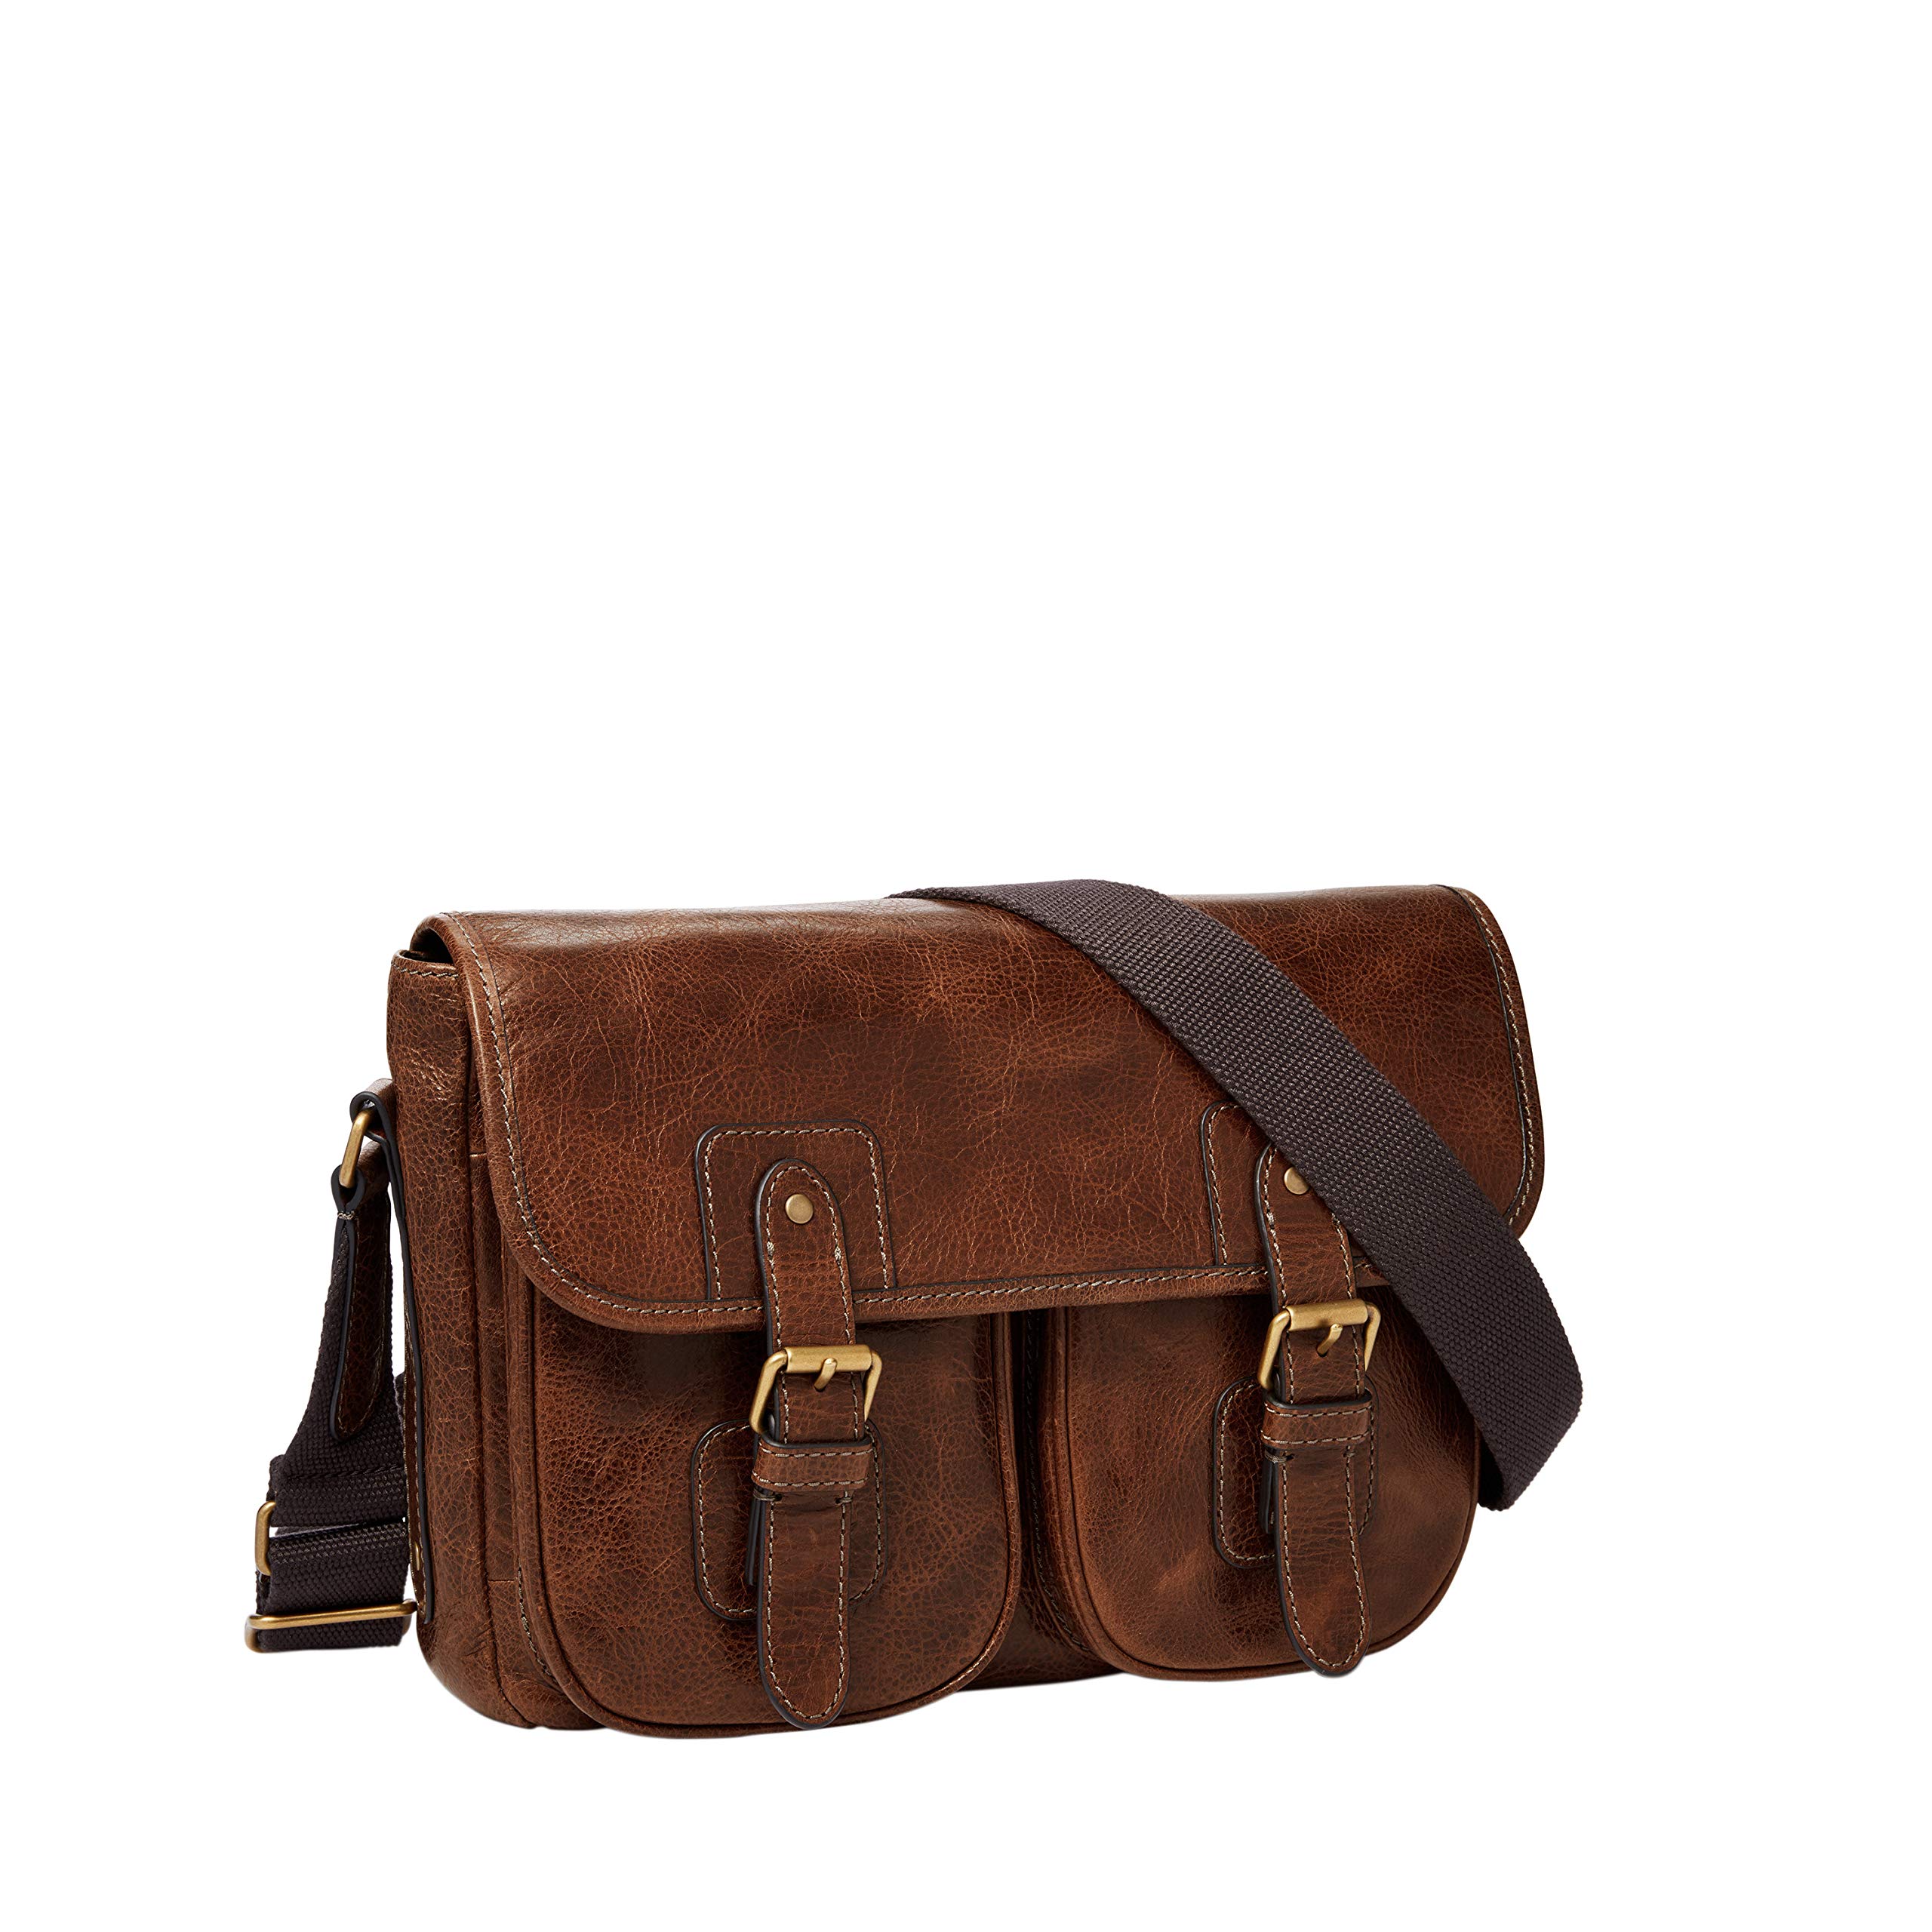 Fossil Men's Leather or Fabric Courier Messenger Bag for Men